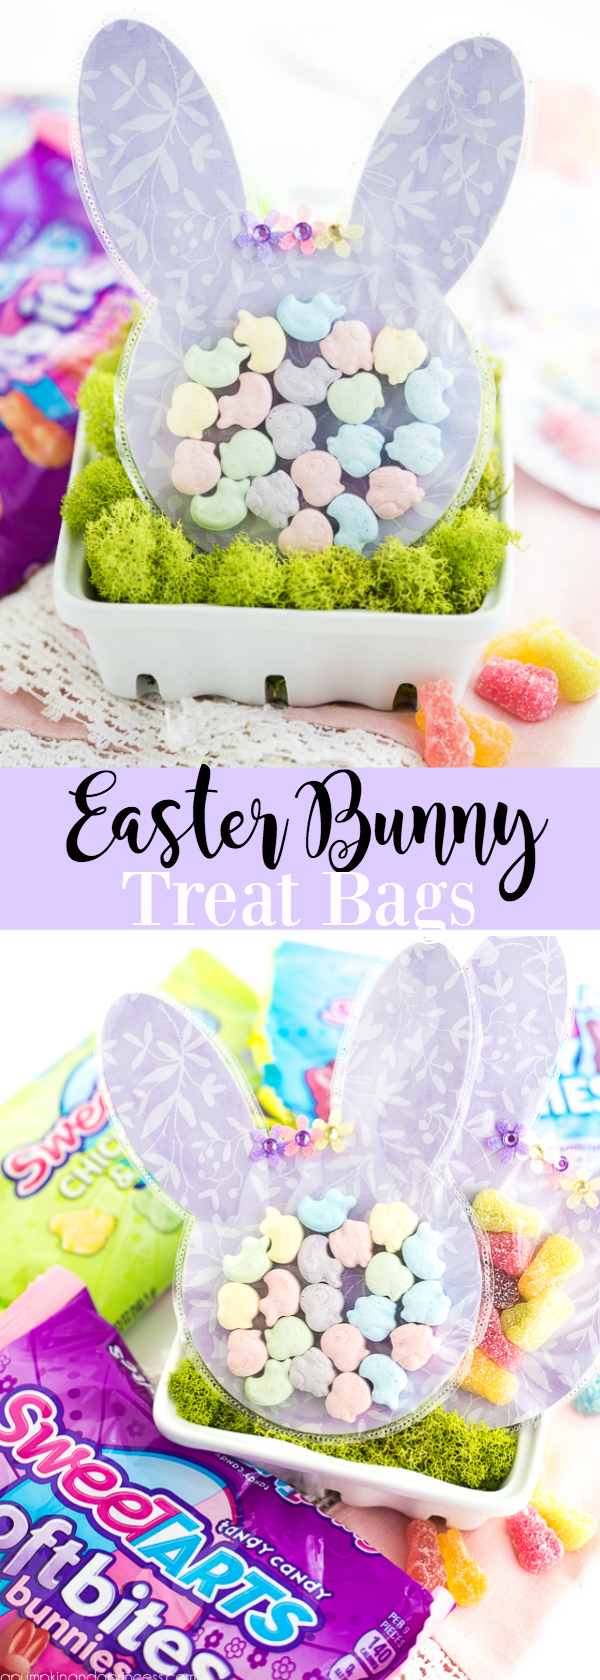 Easter-Bunny-Treat-Bags-1